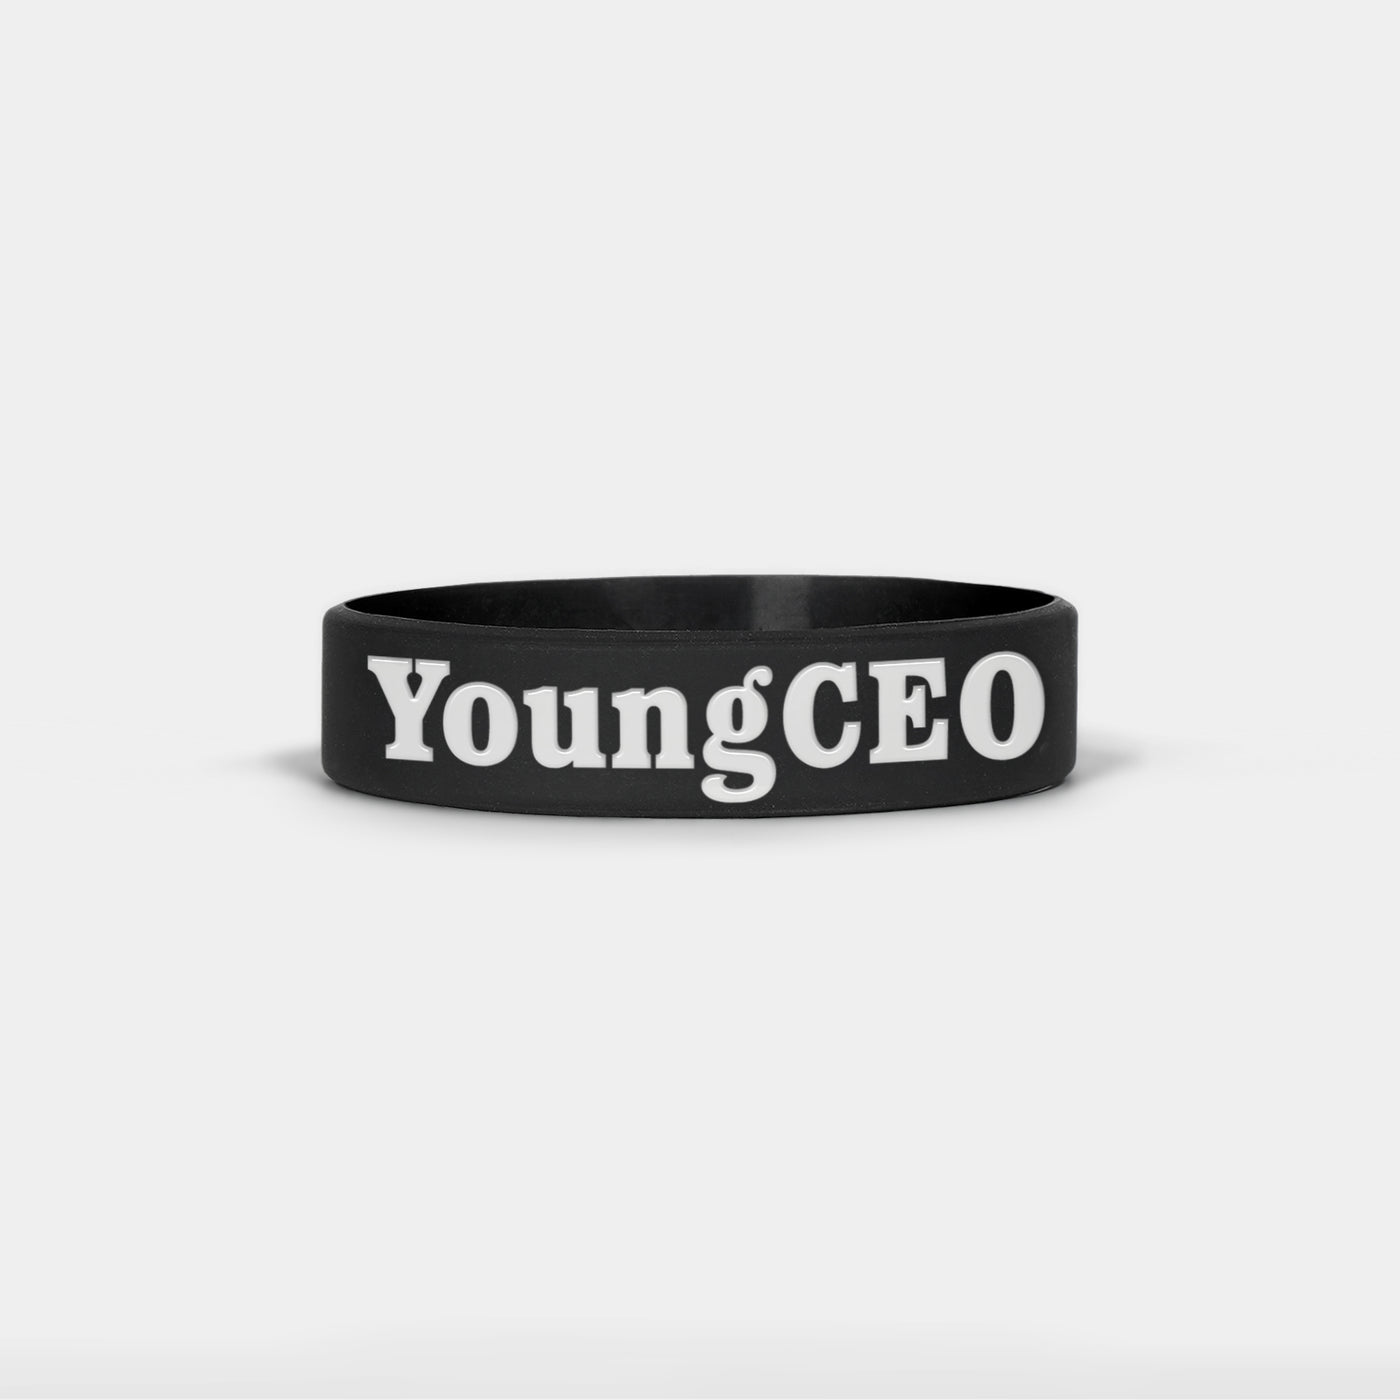 Young CEO Kids Motivational Wristband